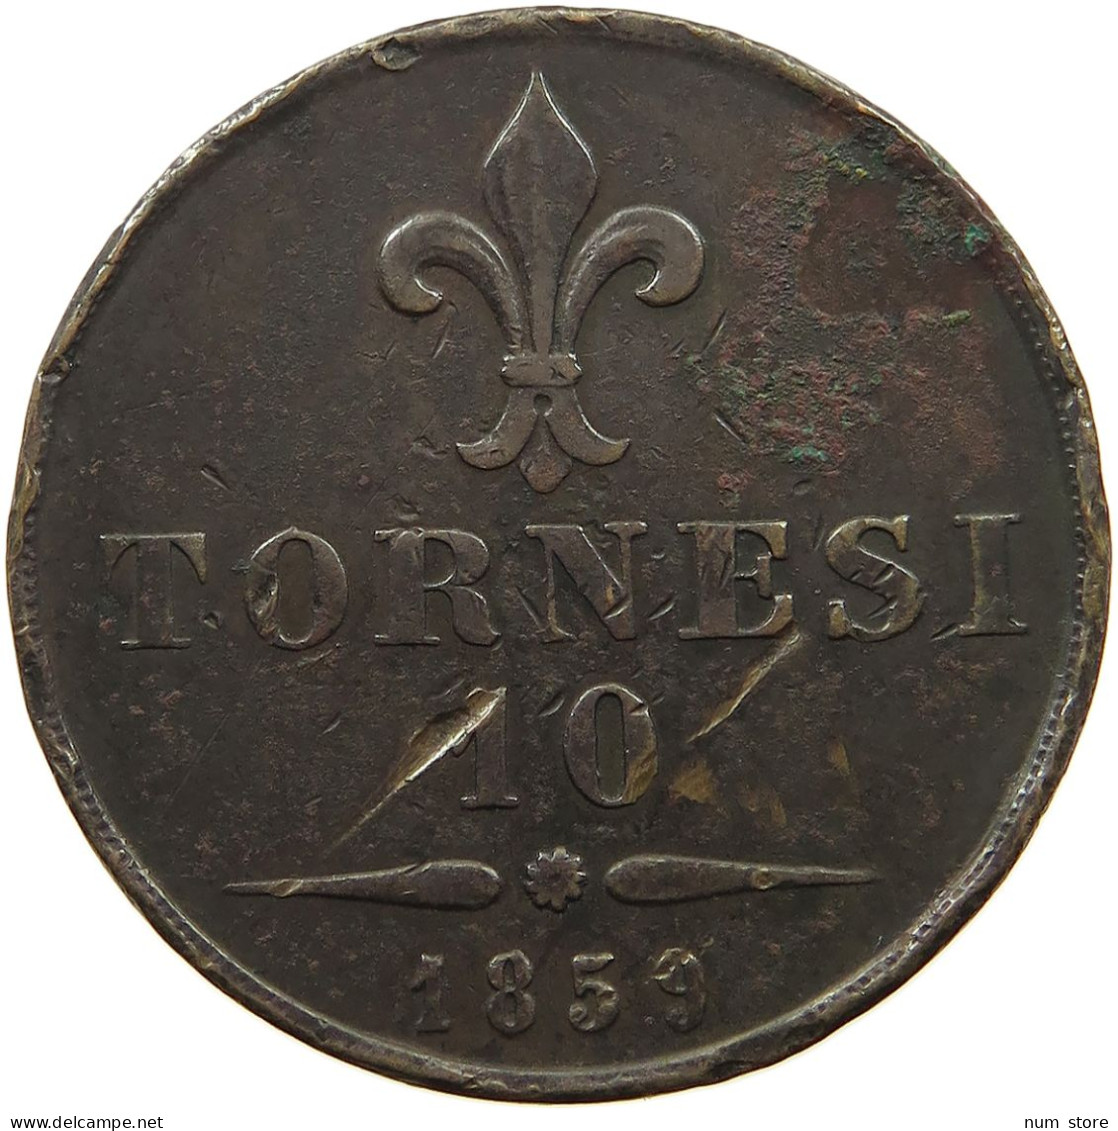 ITALY STATES SICILY 10 TORNESI 1859  #t161 0159 - Sizilien